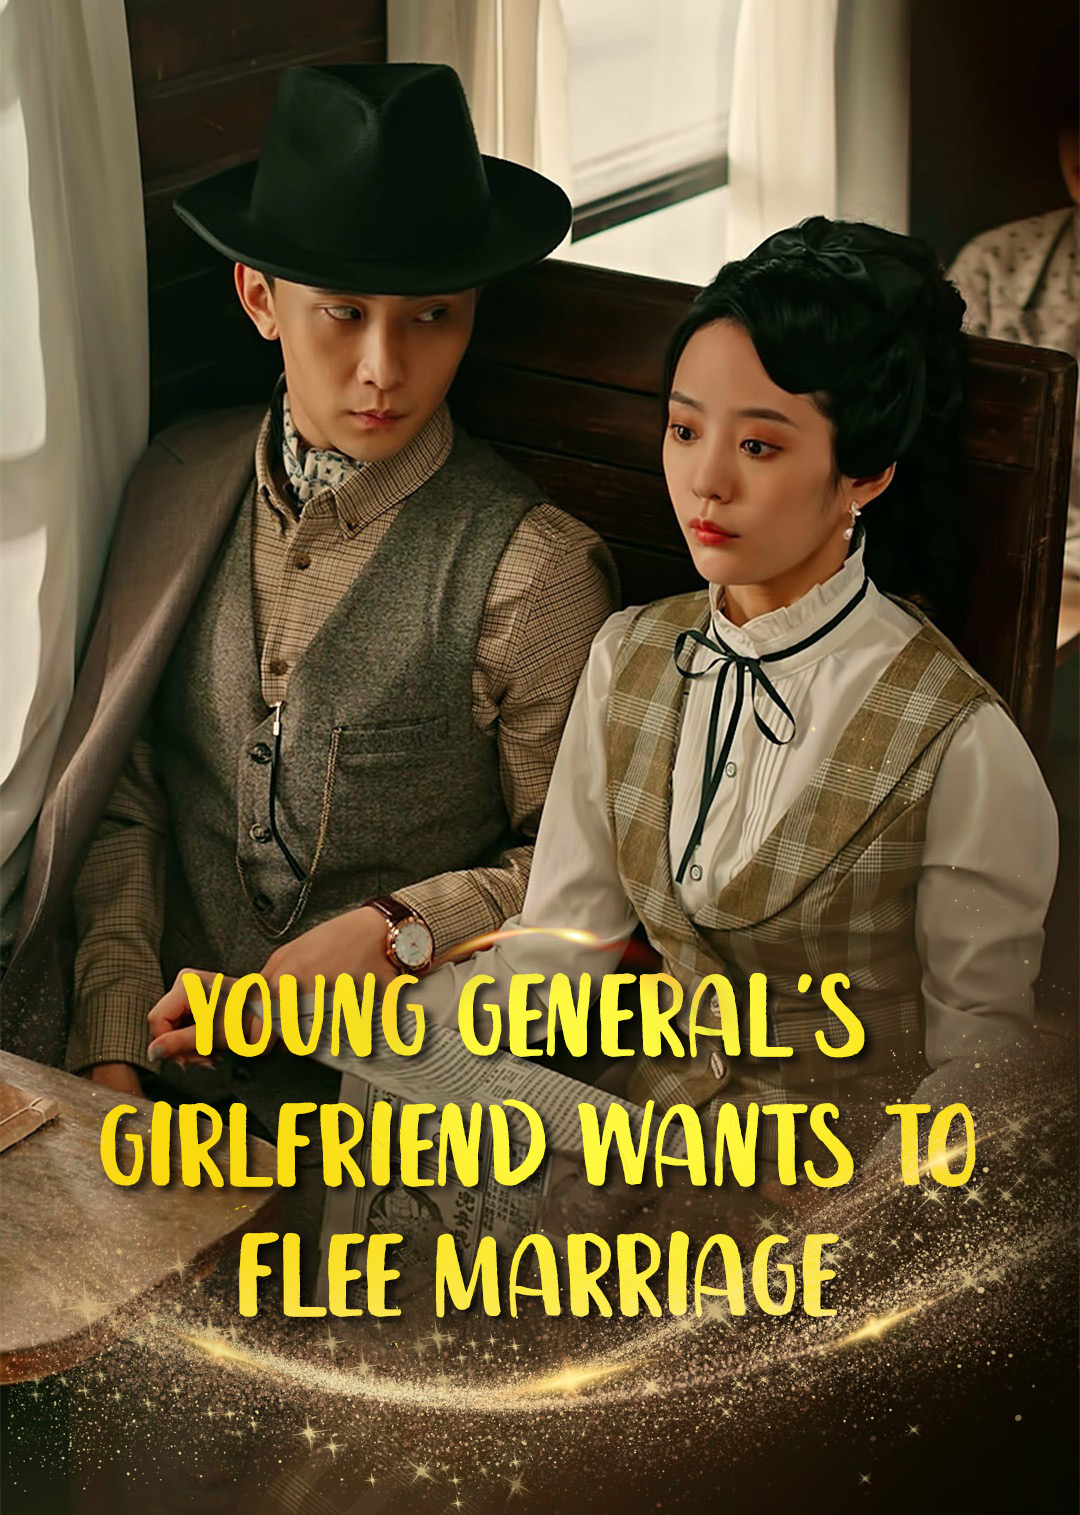 Young General’s Girlfriend Wants to Flee Marriage